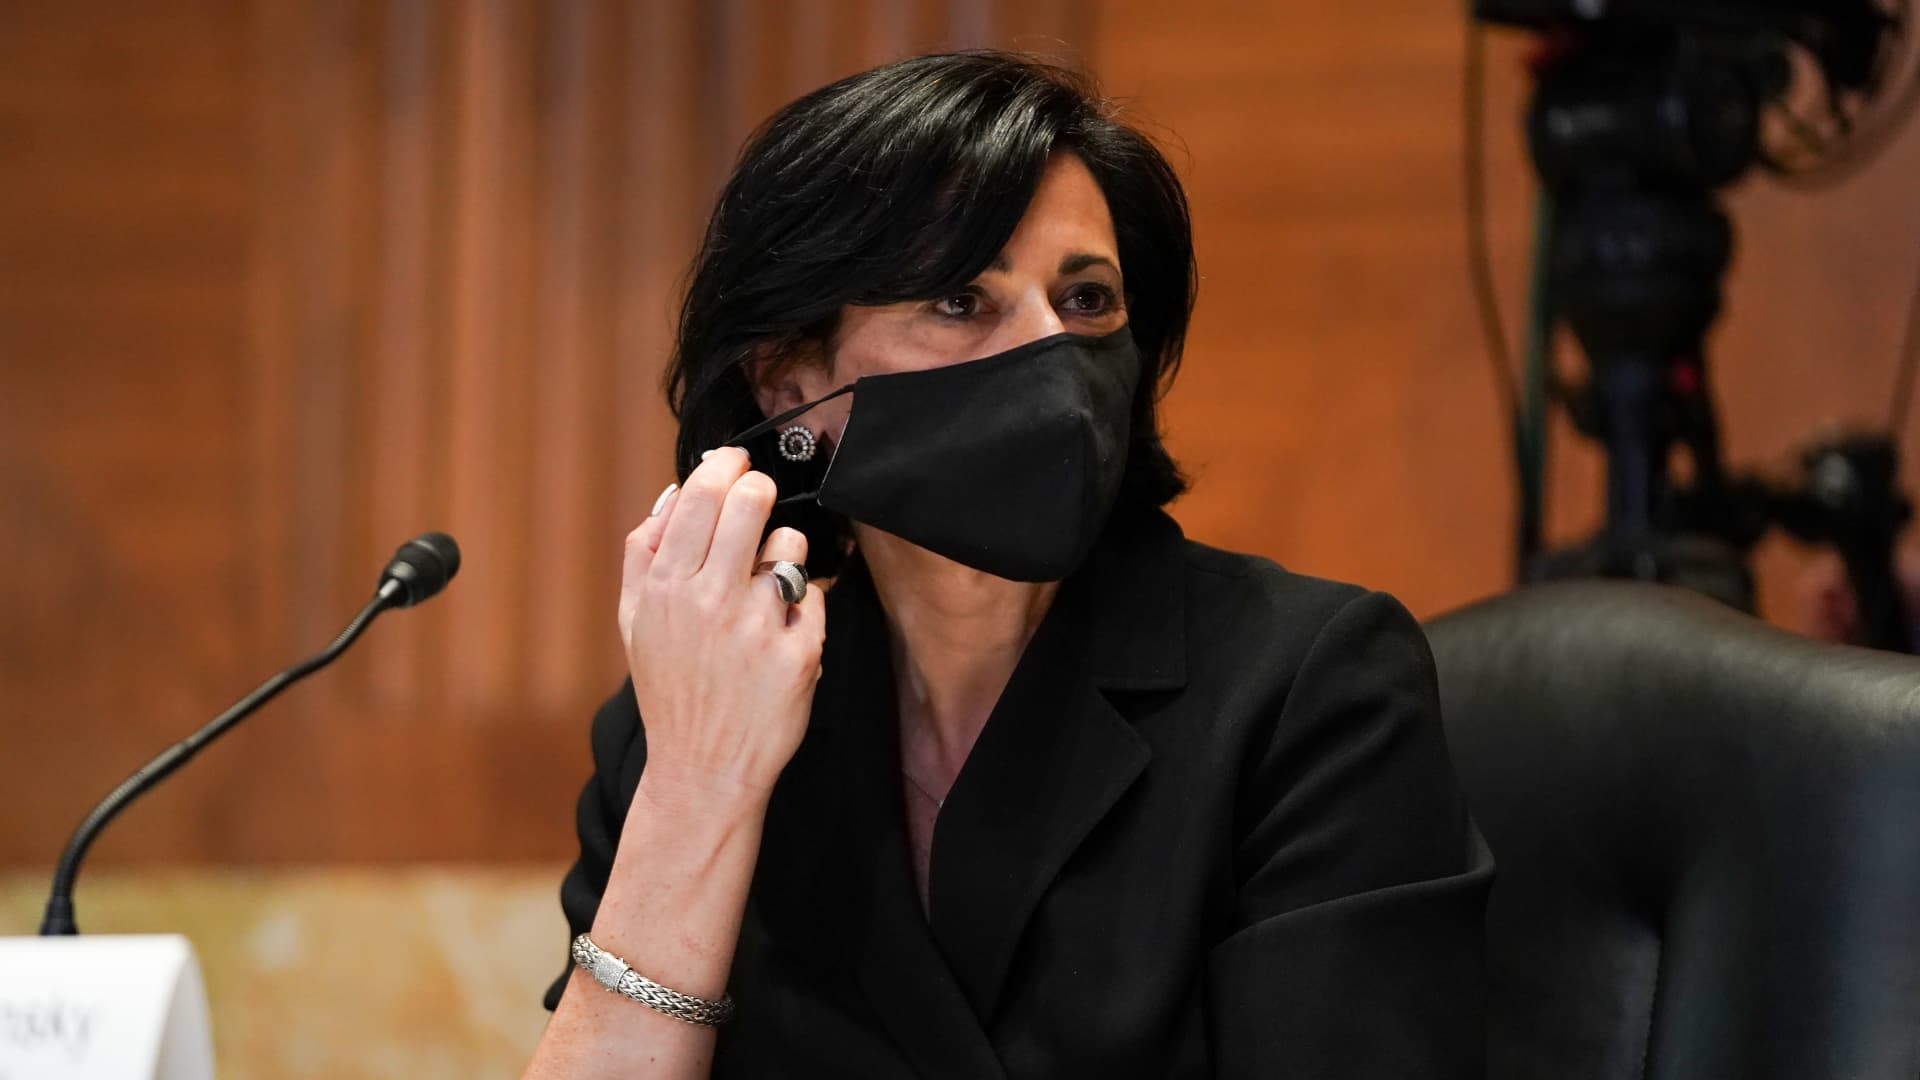 Rochelle Walensky, director of the U.S. Centers for Disease Control and Prevention (CDC), takes off a protective mask during a Senate Appropriations Subcommittee hearing in Washington, D.C., U.S., on Wednesday, May 19, 2021.